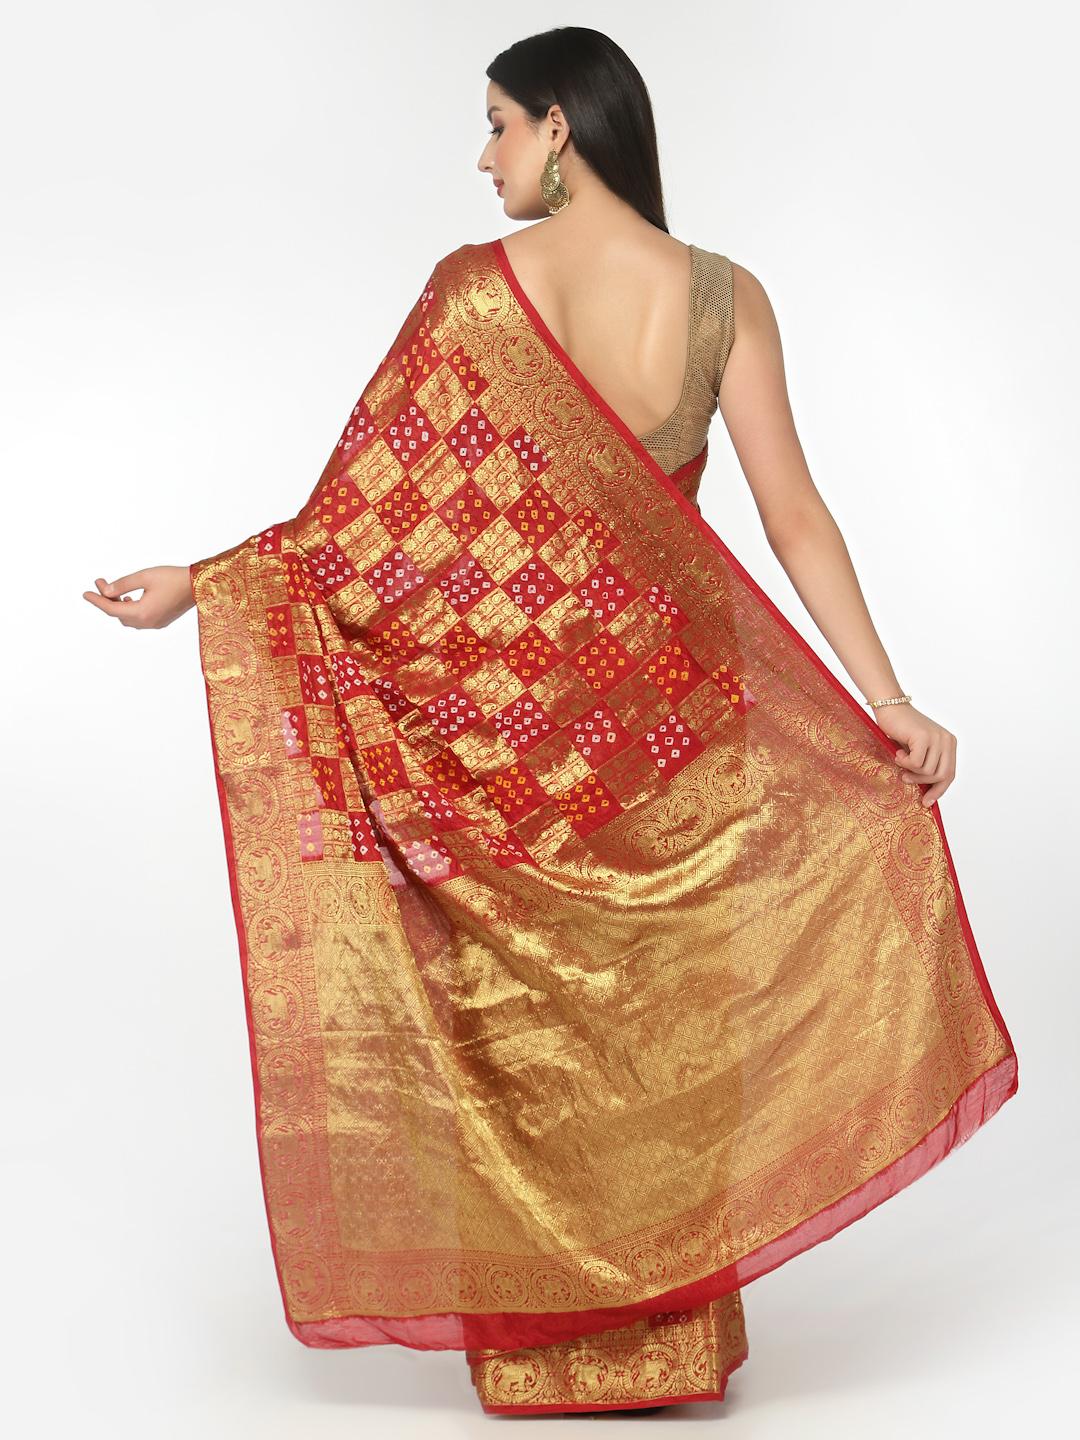 Women Silk Bandhani and Zari Weaving Saree with Unstitched Blouse - Red And Gold